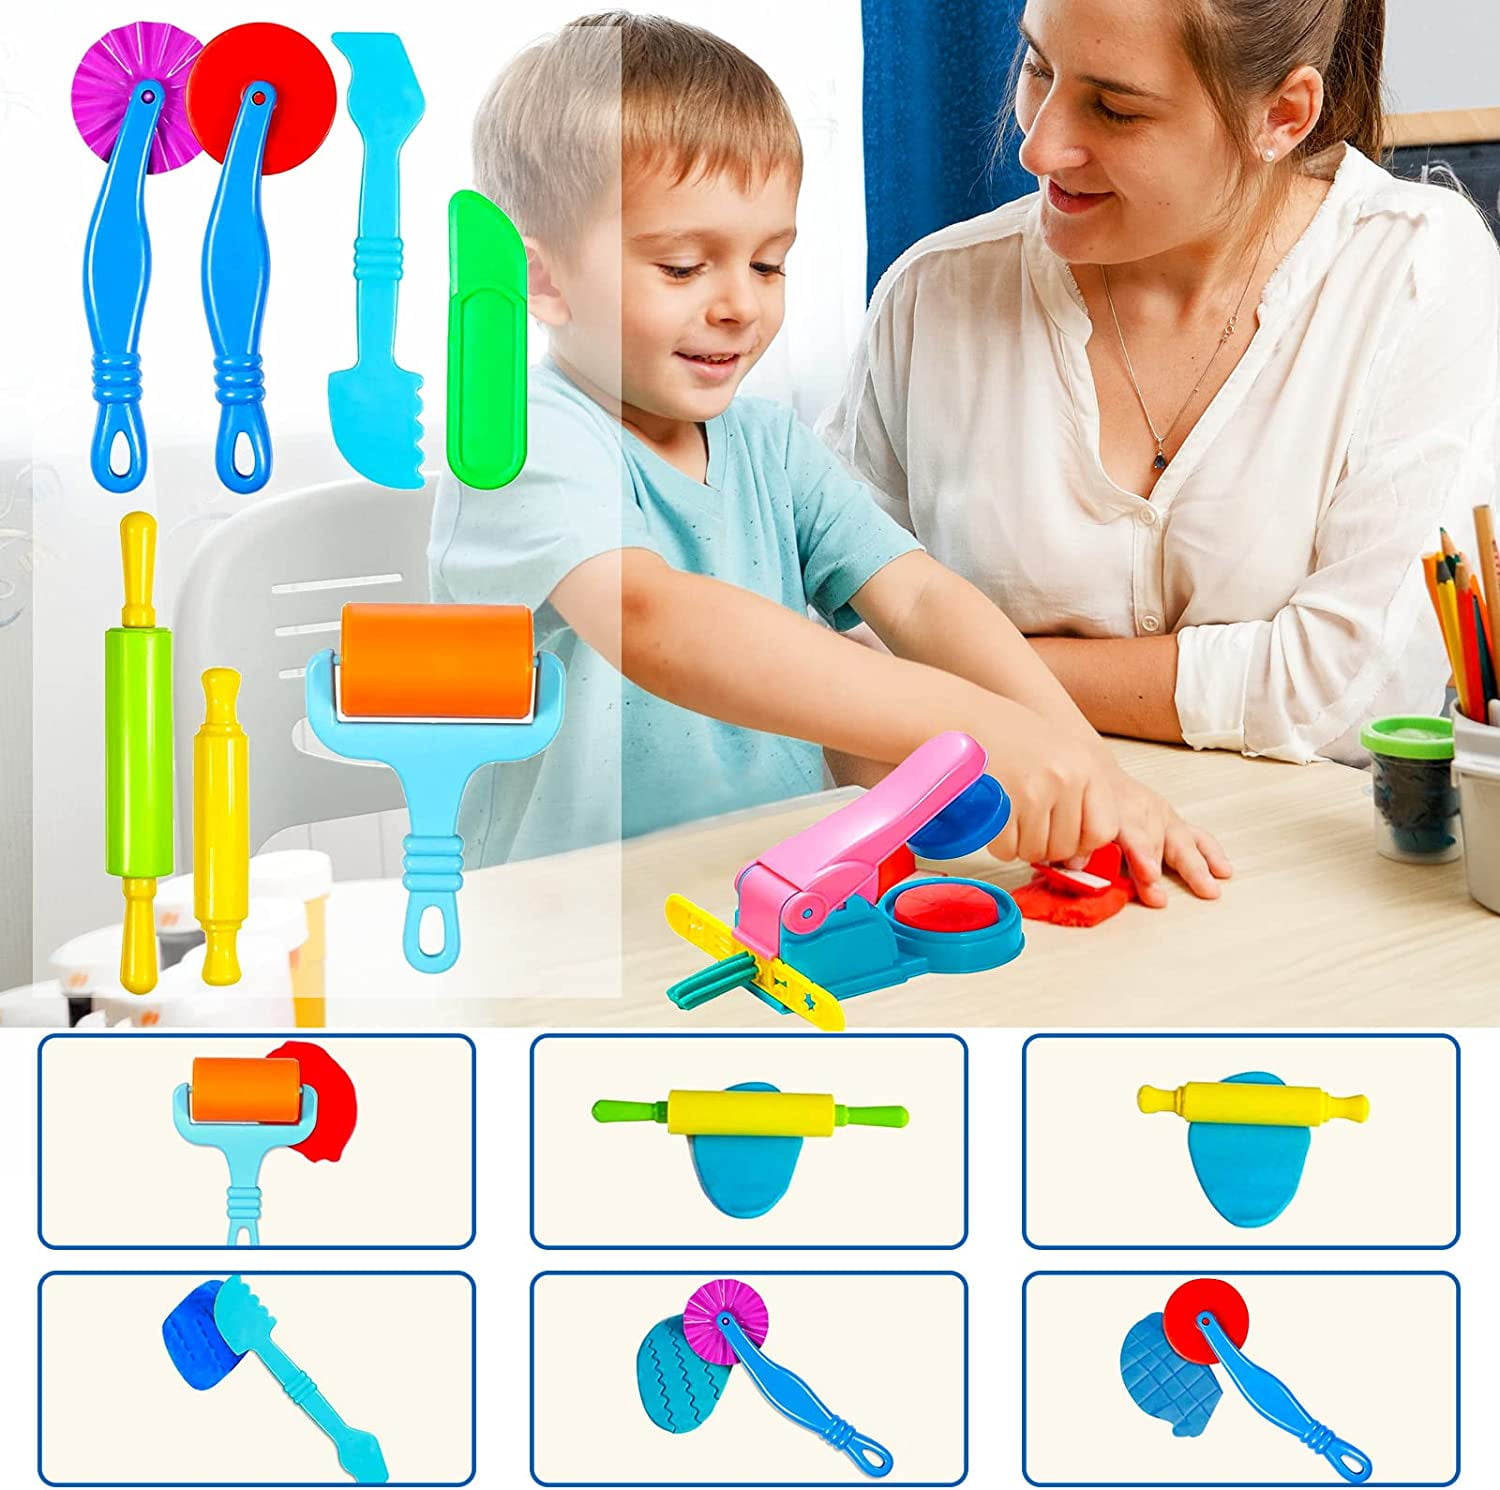 READY 2 LEARN Dough Tools - Set of 6 - Arts and Crafts for Kids - Sculpting  Tools to Roll, Cut, Mold and Flatten - Art Supplies for Pottery and Dough